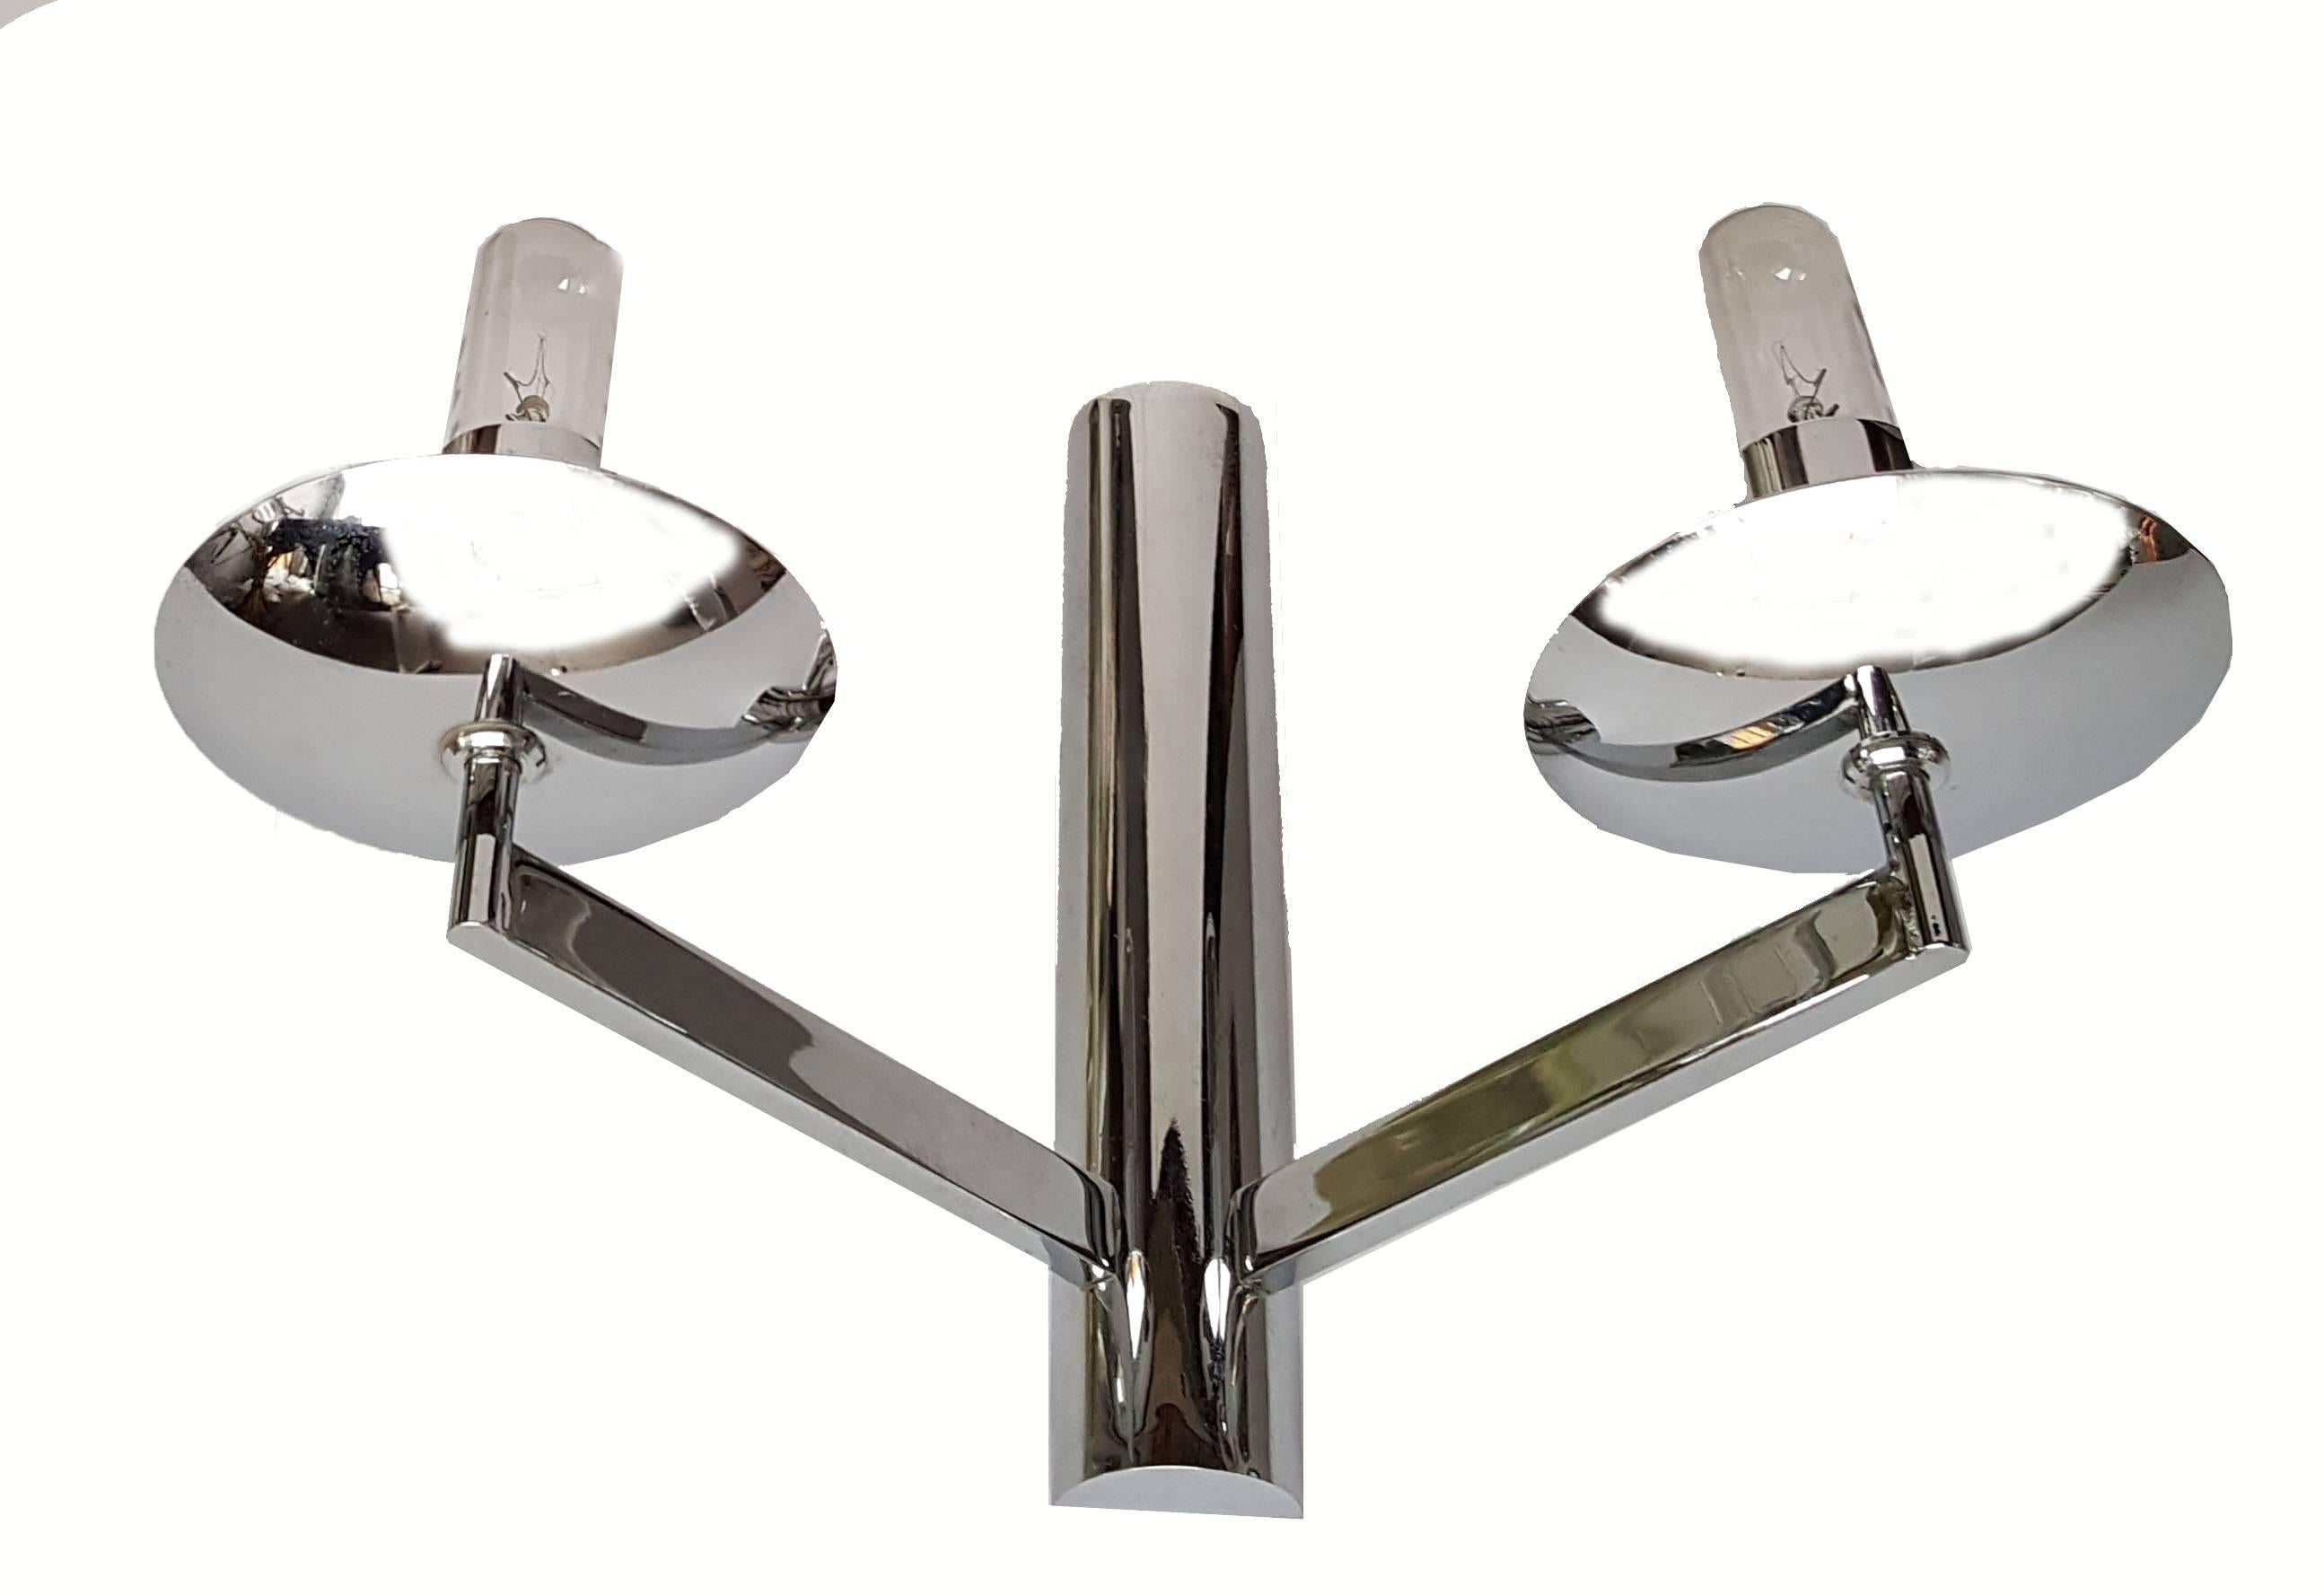 Nice pair of two-arm Sciolari sconces, wall lamps in Nickel made in Italy.
US Rewiring and each Light takes 2 light bulbs with 60 watts.
Mid-Century Modern Lighting ready for a new Home.
Three pair available.
Please take a look at our large